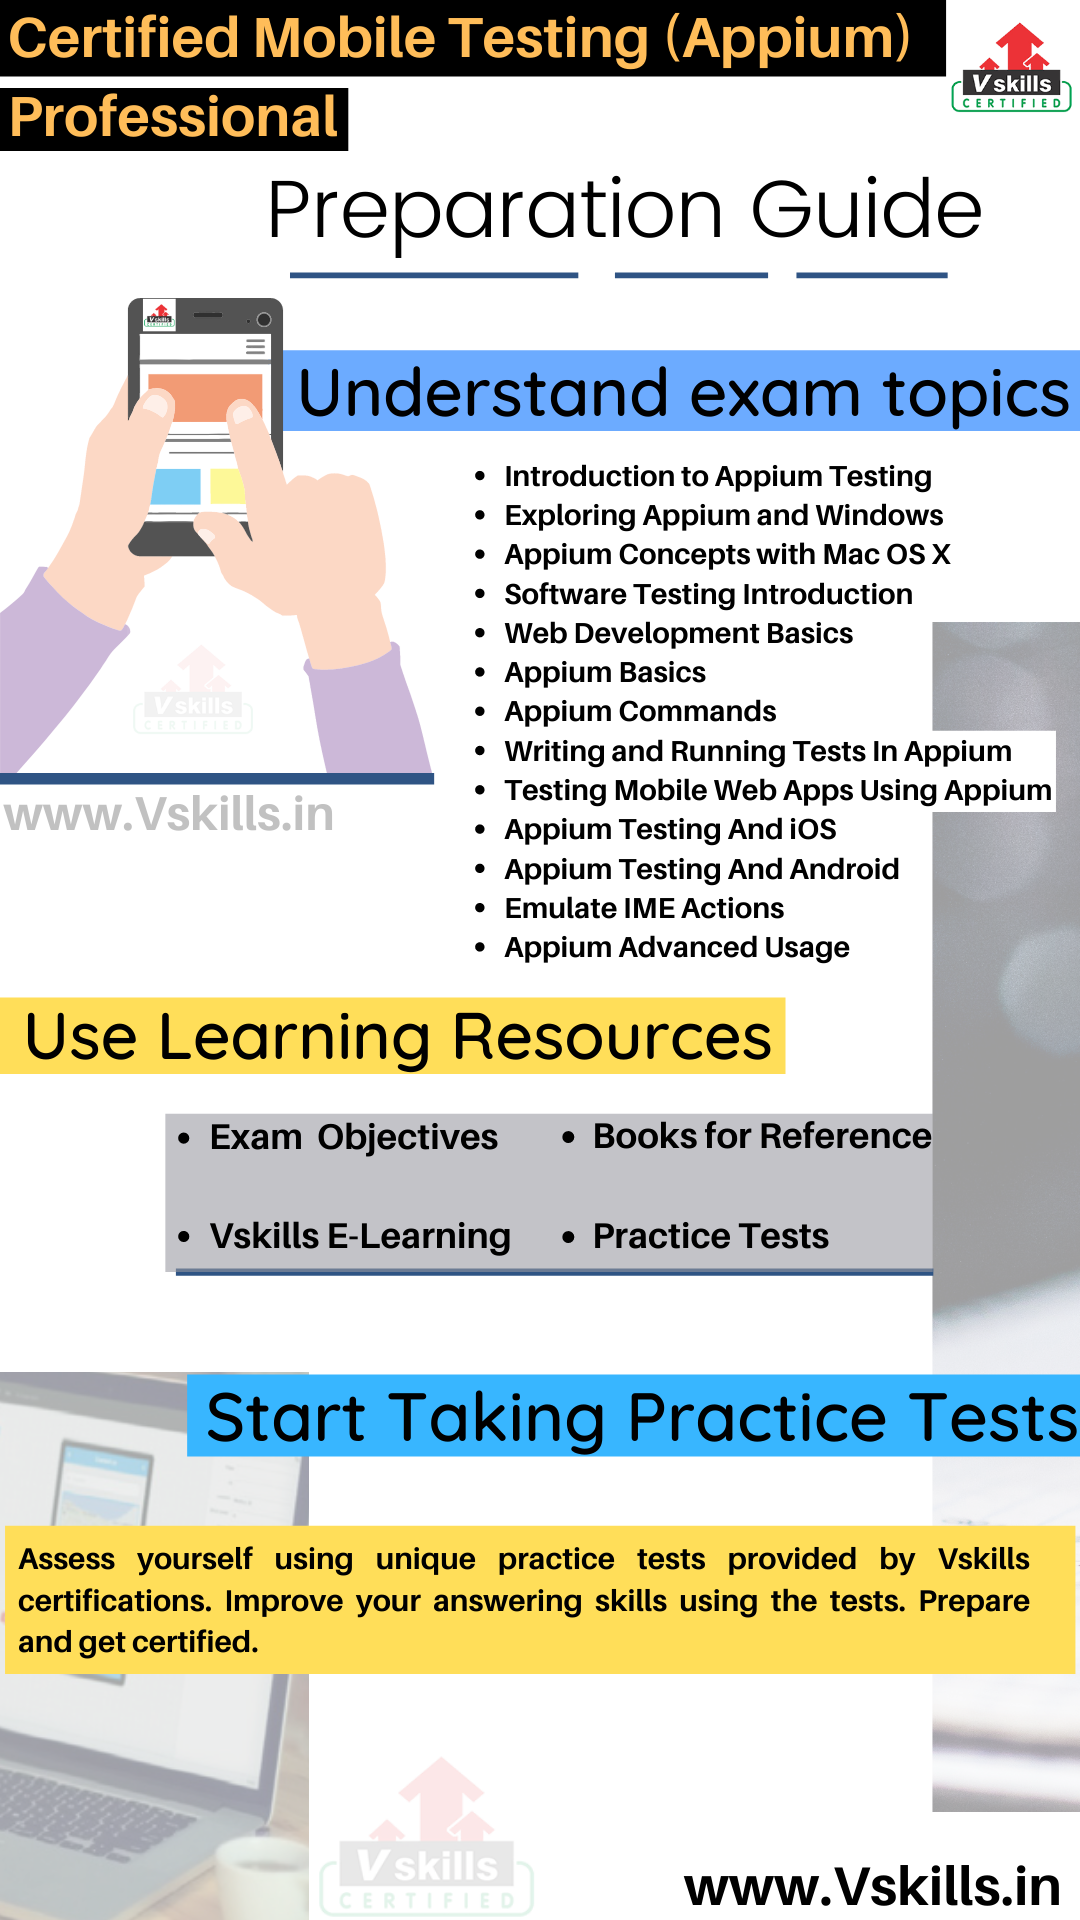 Certified Mobile Testing (Appium) Professional study guide